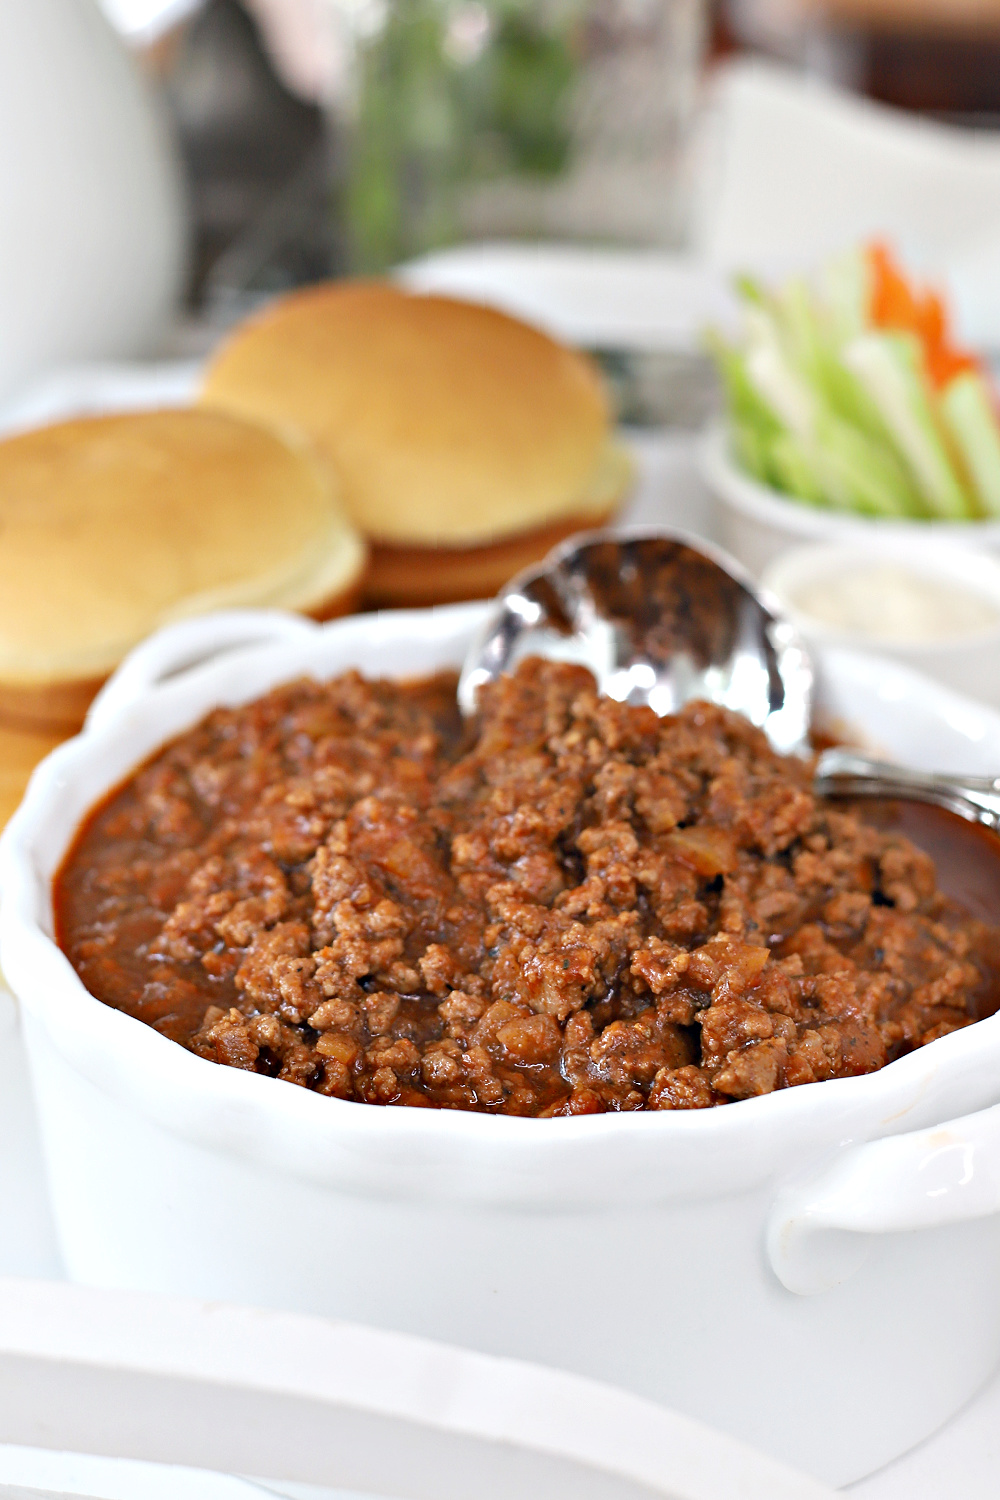 Easy recipe for sloppy joes sandwiches